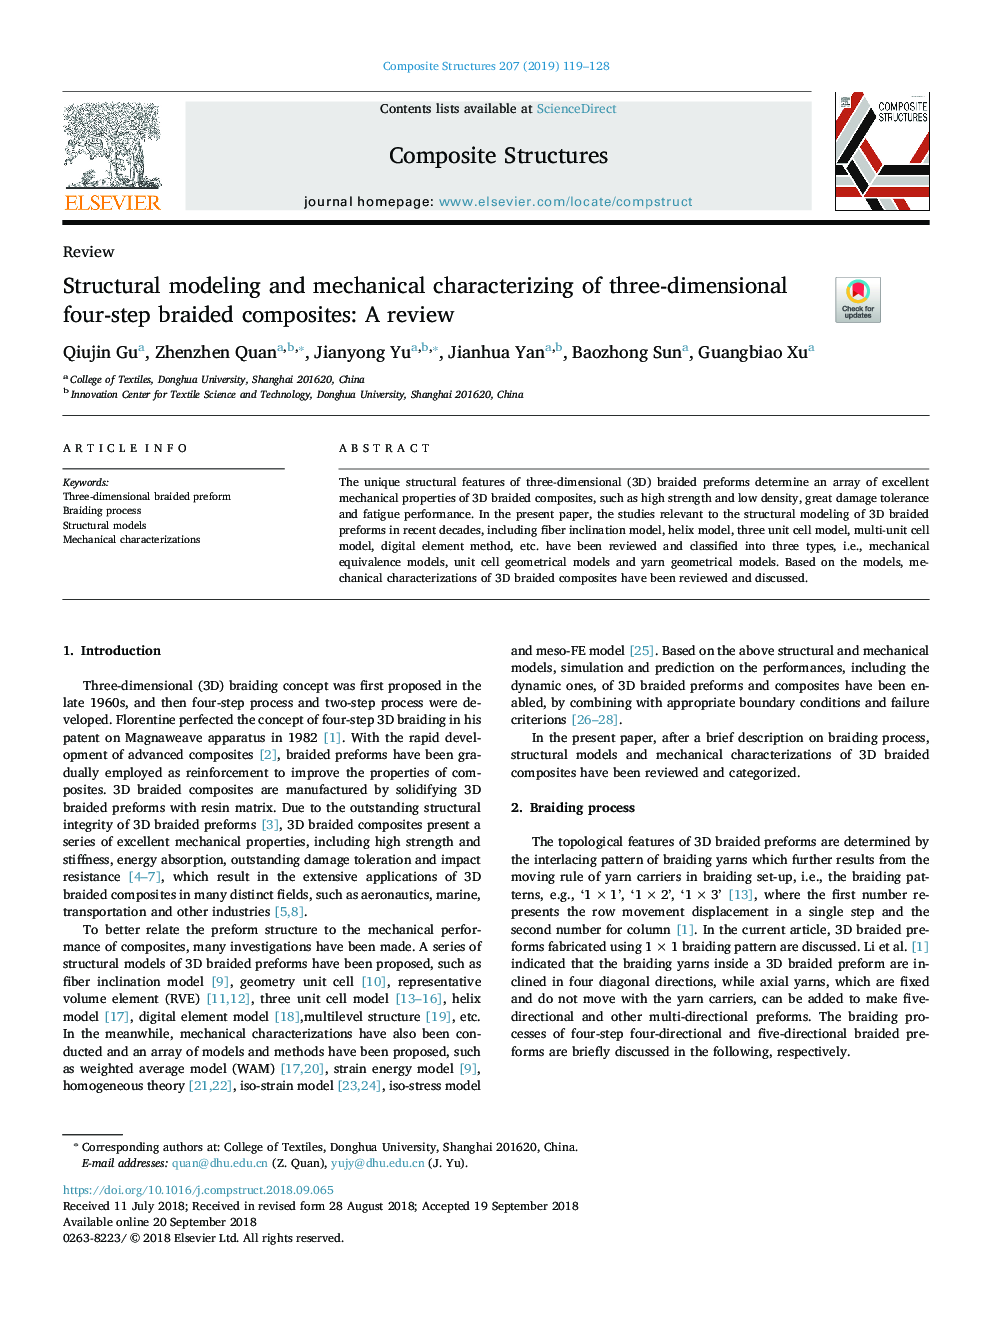 Structural modeling and mechanical characterizing of three-dimensional four-step braided composites: A review